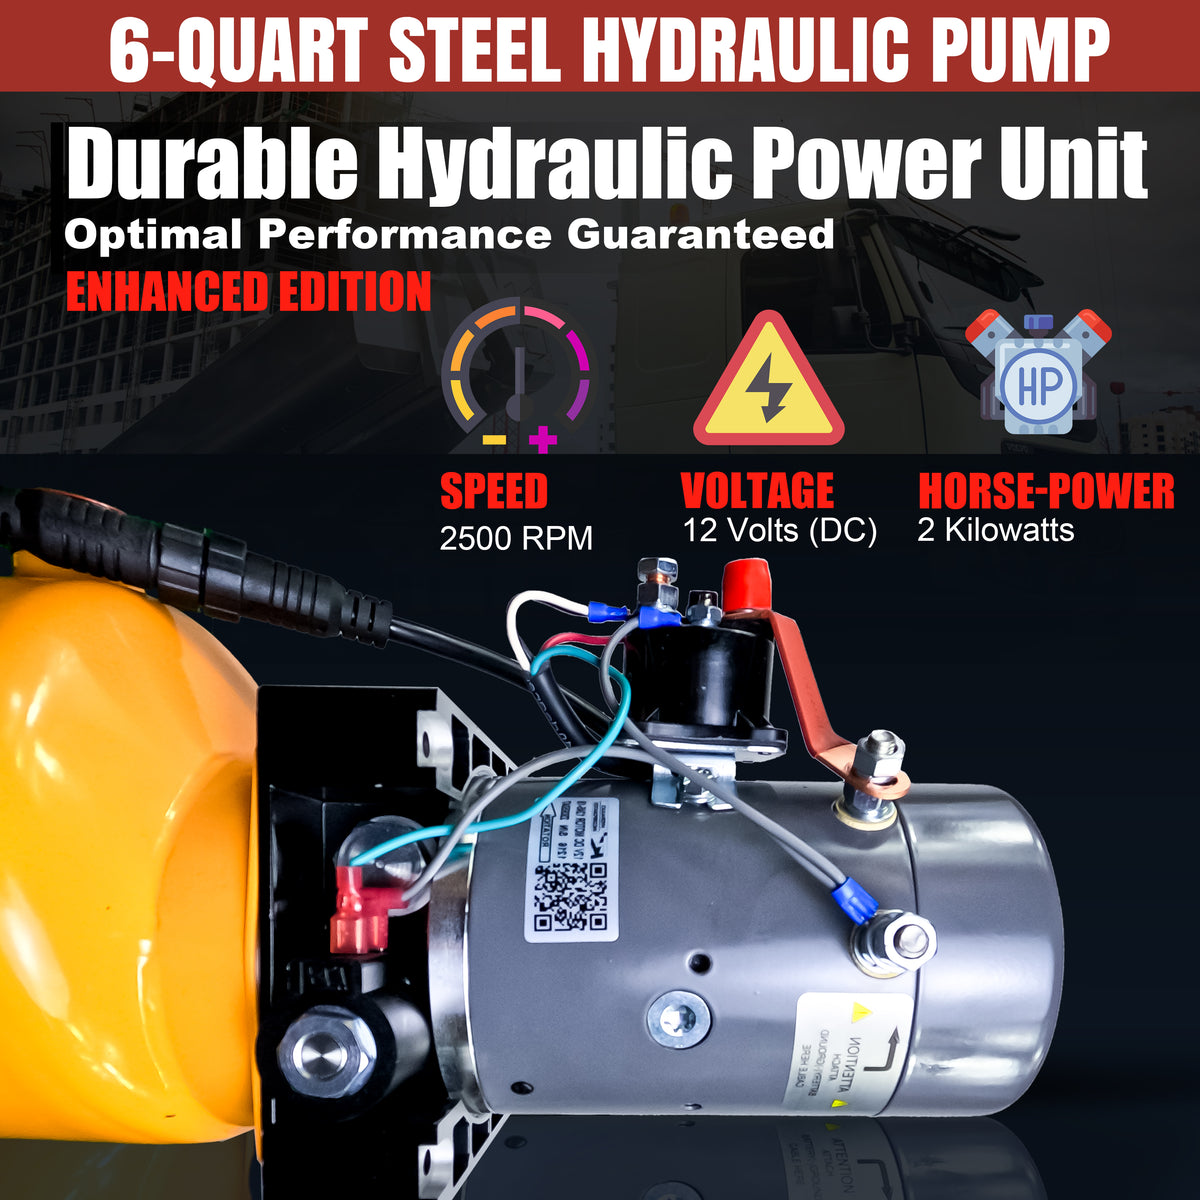 KTI 12V Single-Acting Hydraulic Pump with steel reservoir, featuring a compact design, red cap, QR code, and yellow warning symbol for efficient dump bed systems.